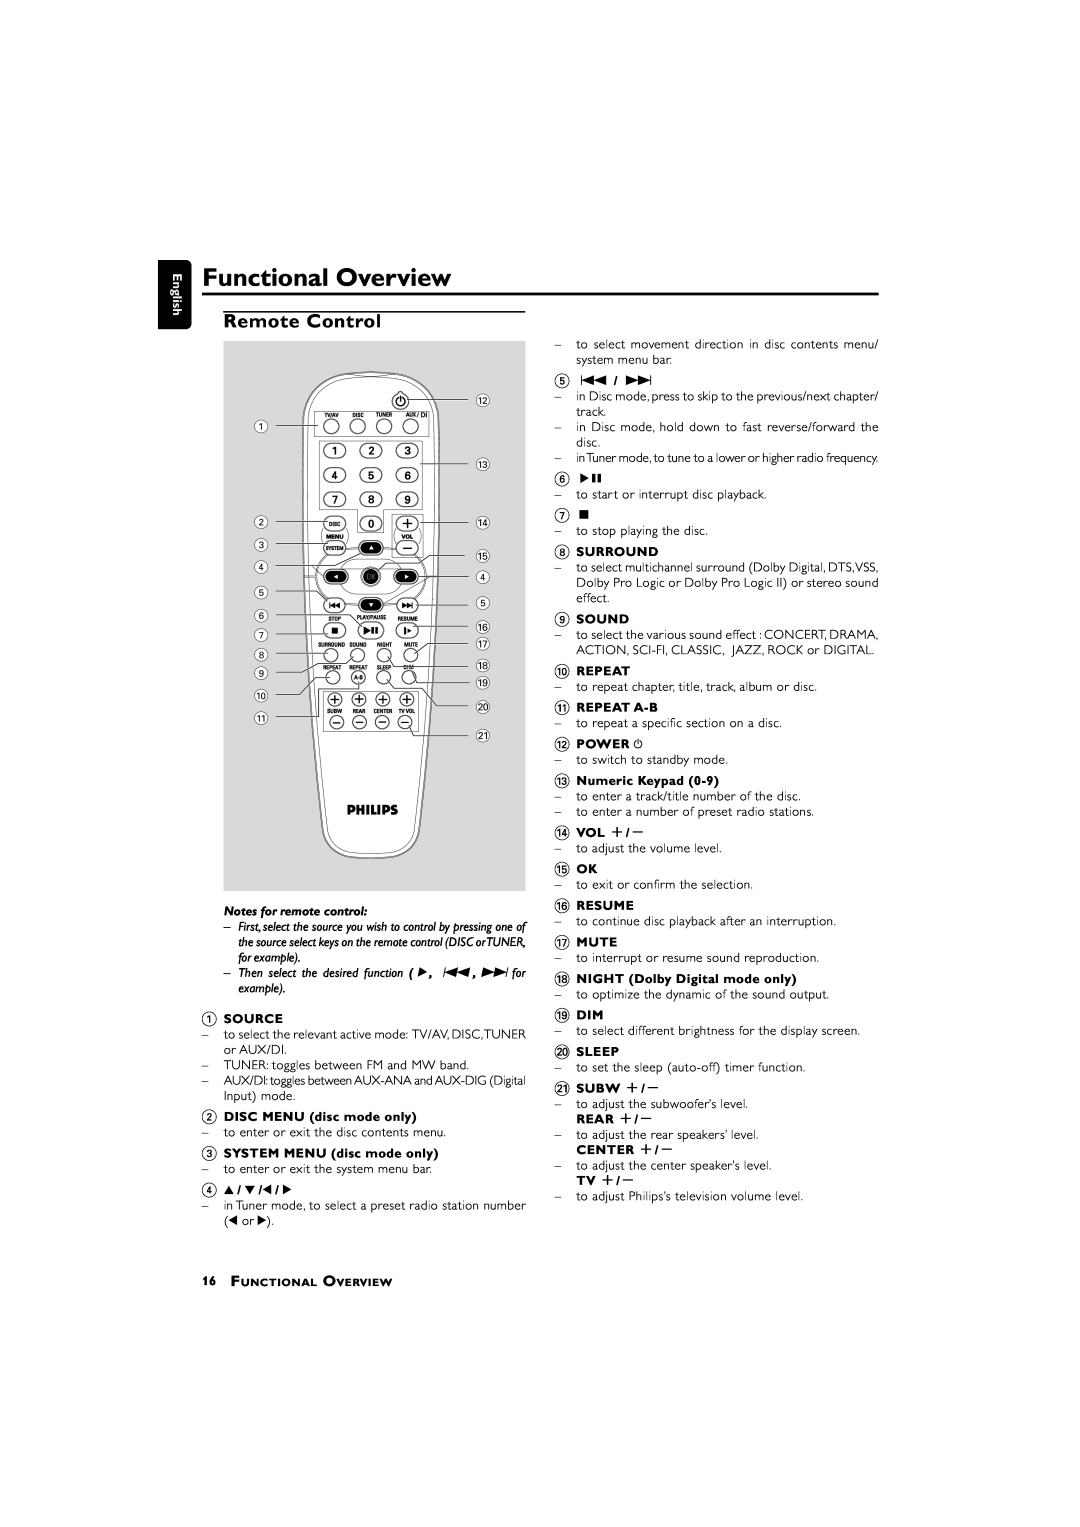 Philips LX3700D manual Remote Control, Functional Overview 